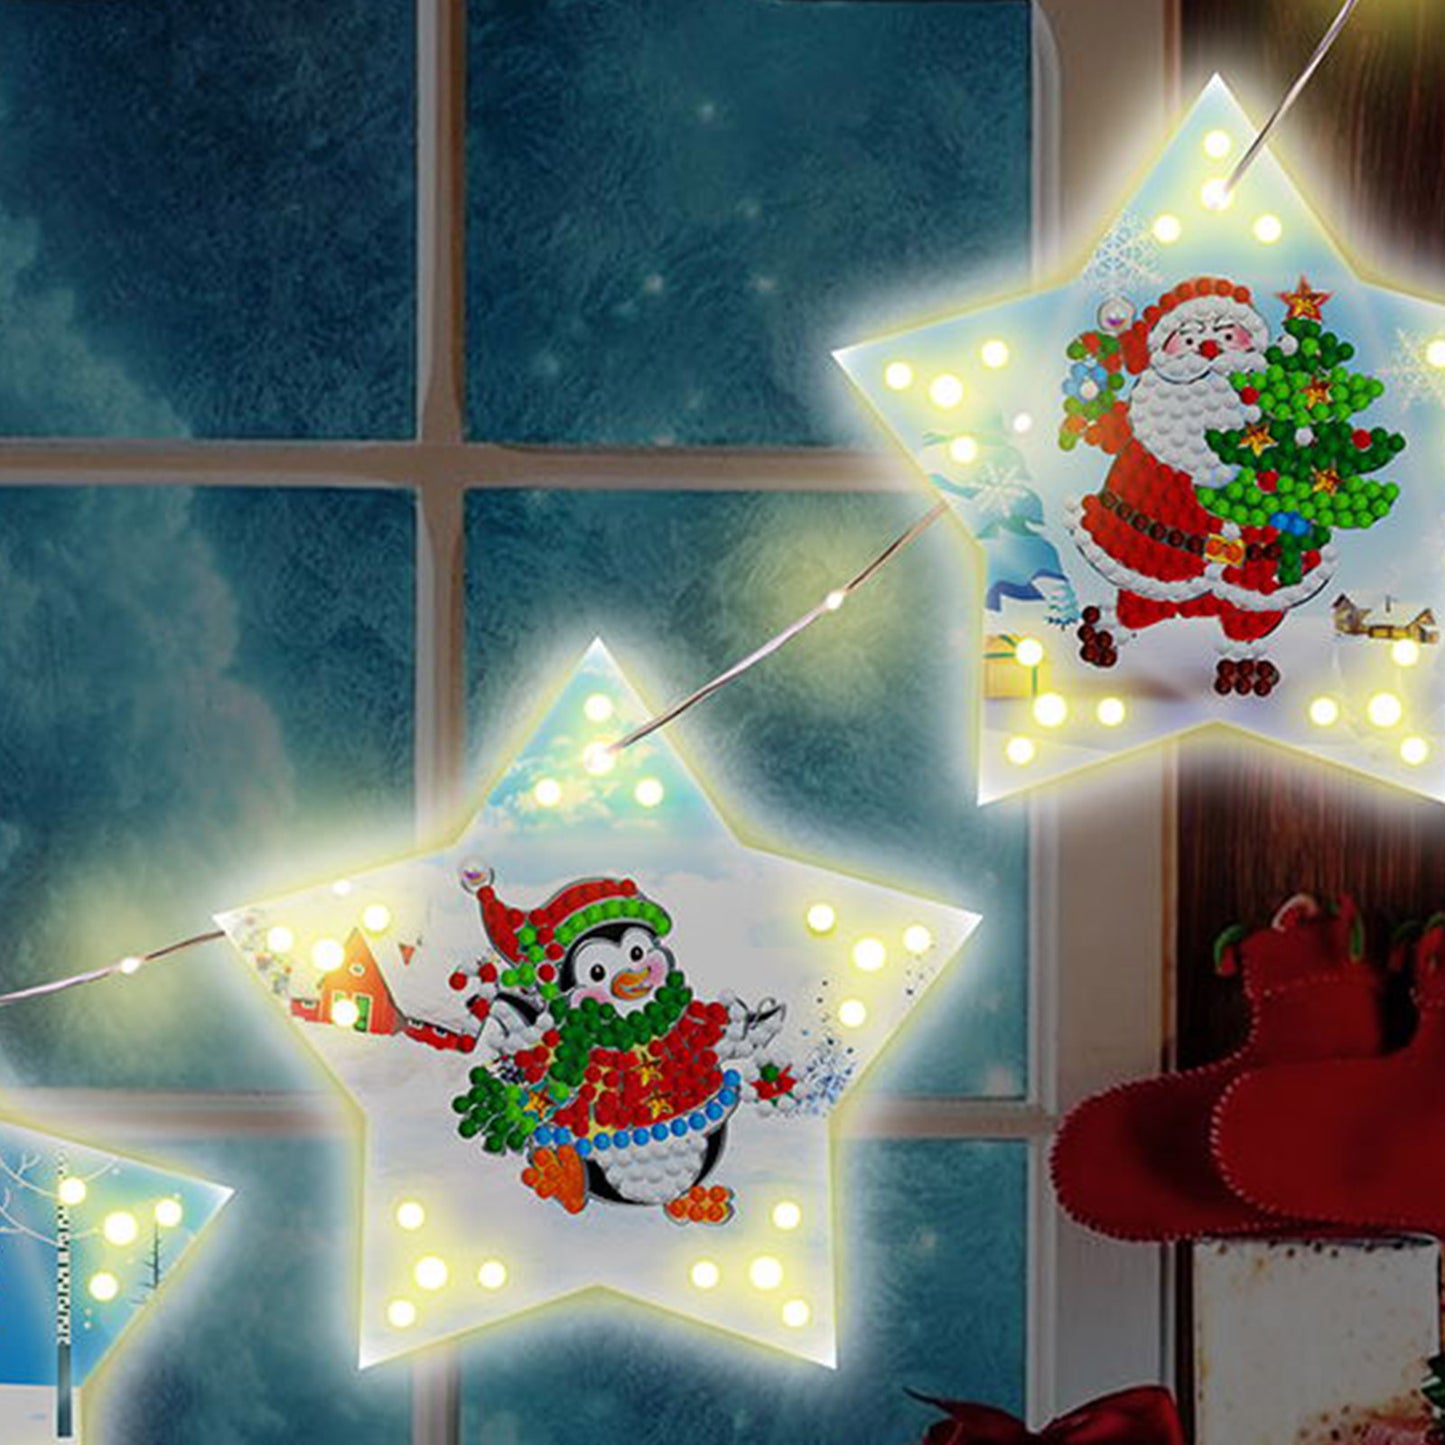 3pcs 5D DIY Diamond Art Painting Lamp with LED Lights Christmas Santa Claus Crystal Embroidery Kit Arts Crafts for Home